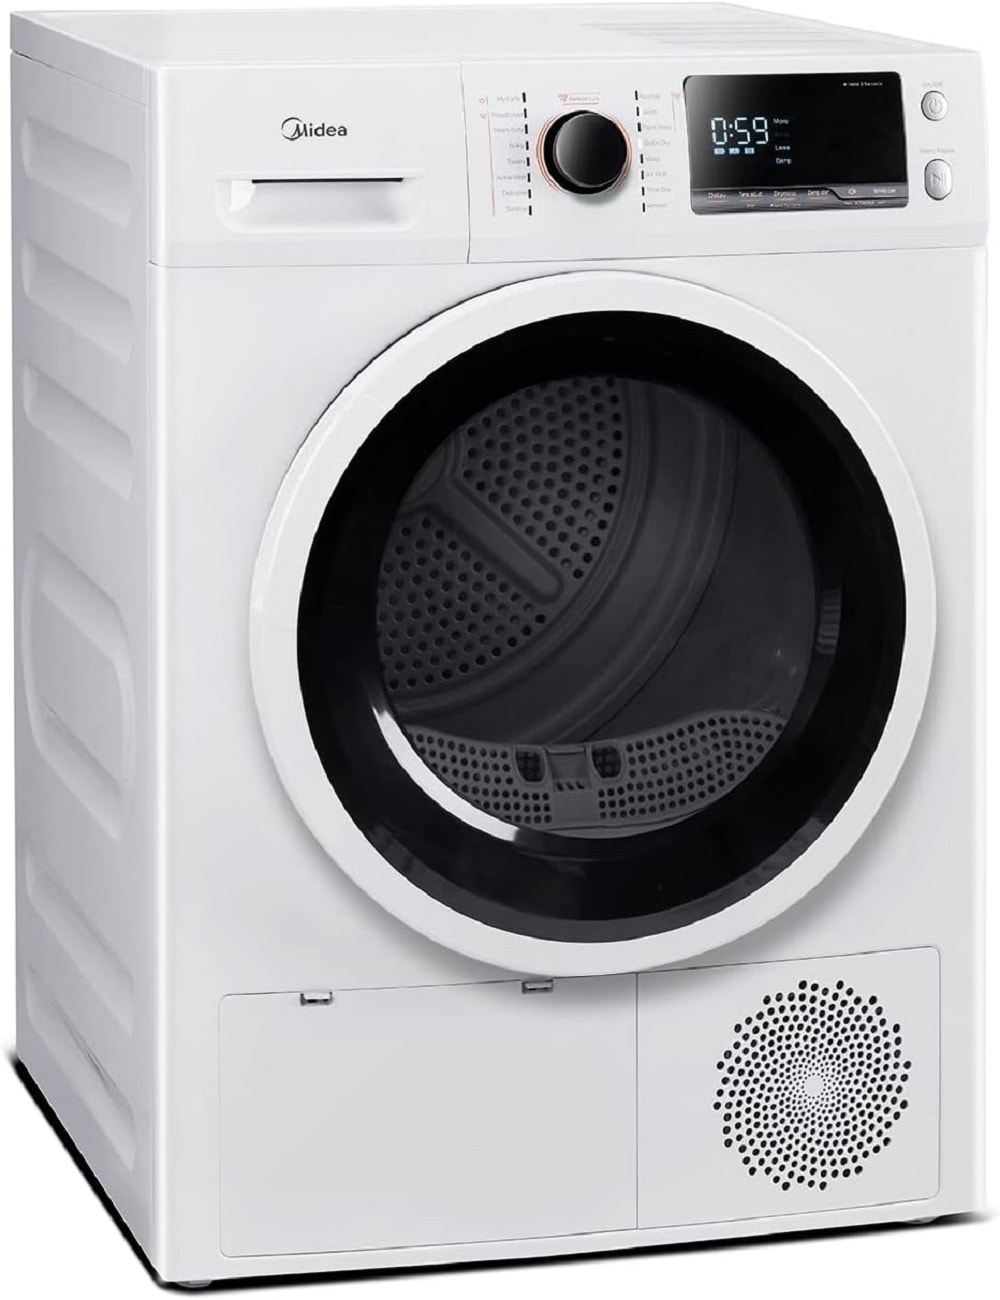 Midea 10kg Clothes Drying Machine UV Germicidal Mite and Moisture